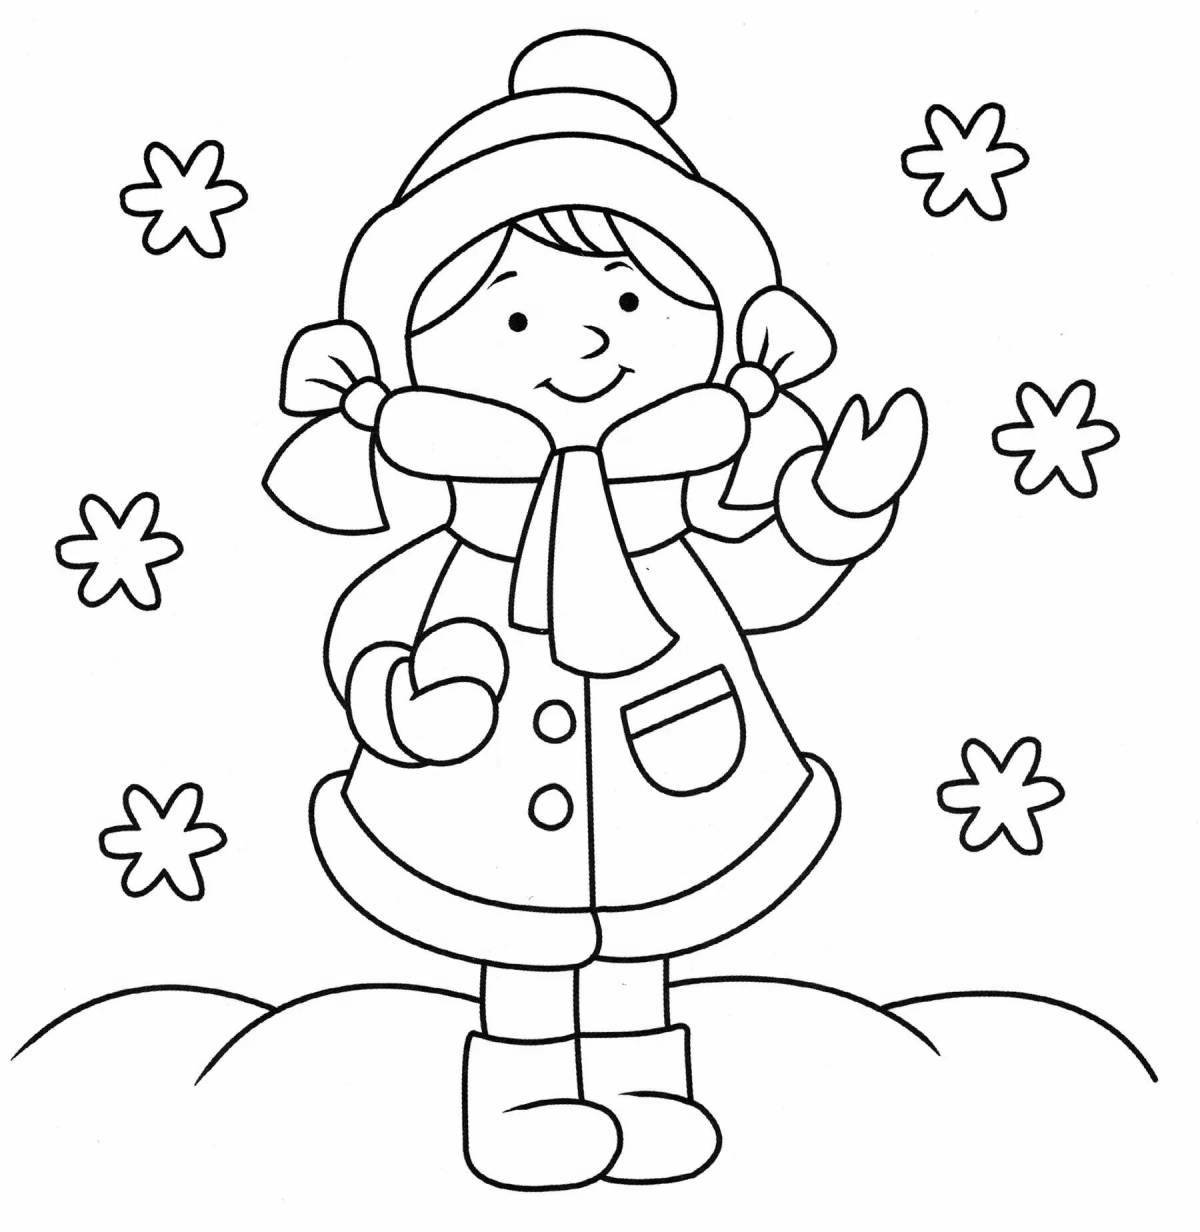 Adorable coloring doll in winter clothes